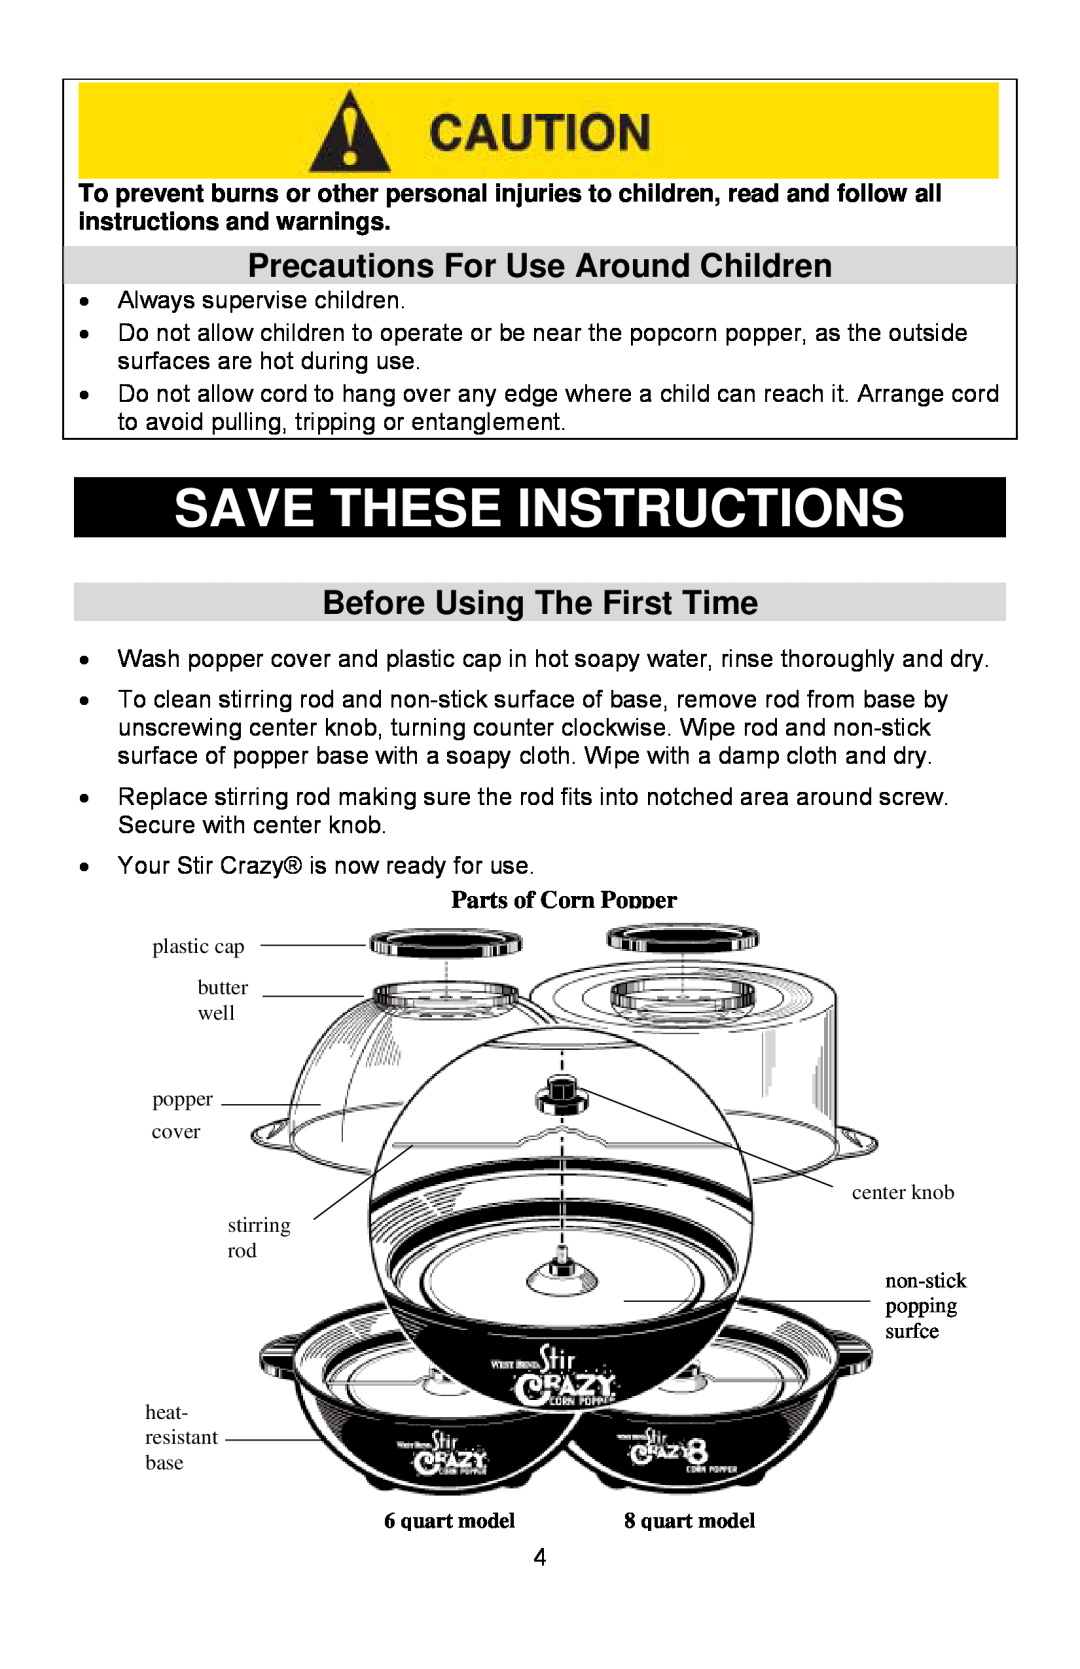 West Bend 6 quart, 8 quart Save These Instructions, Precautions For Use Around Children, Before Using The First Time 